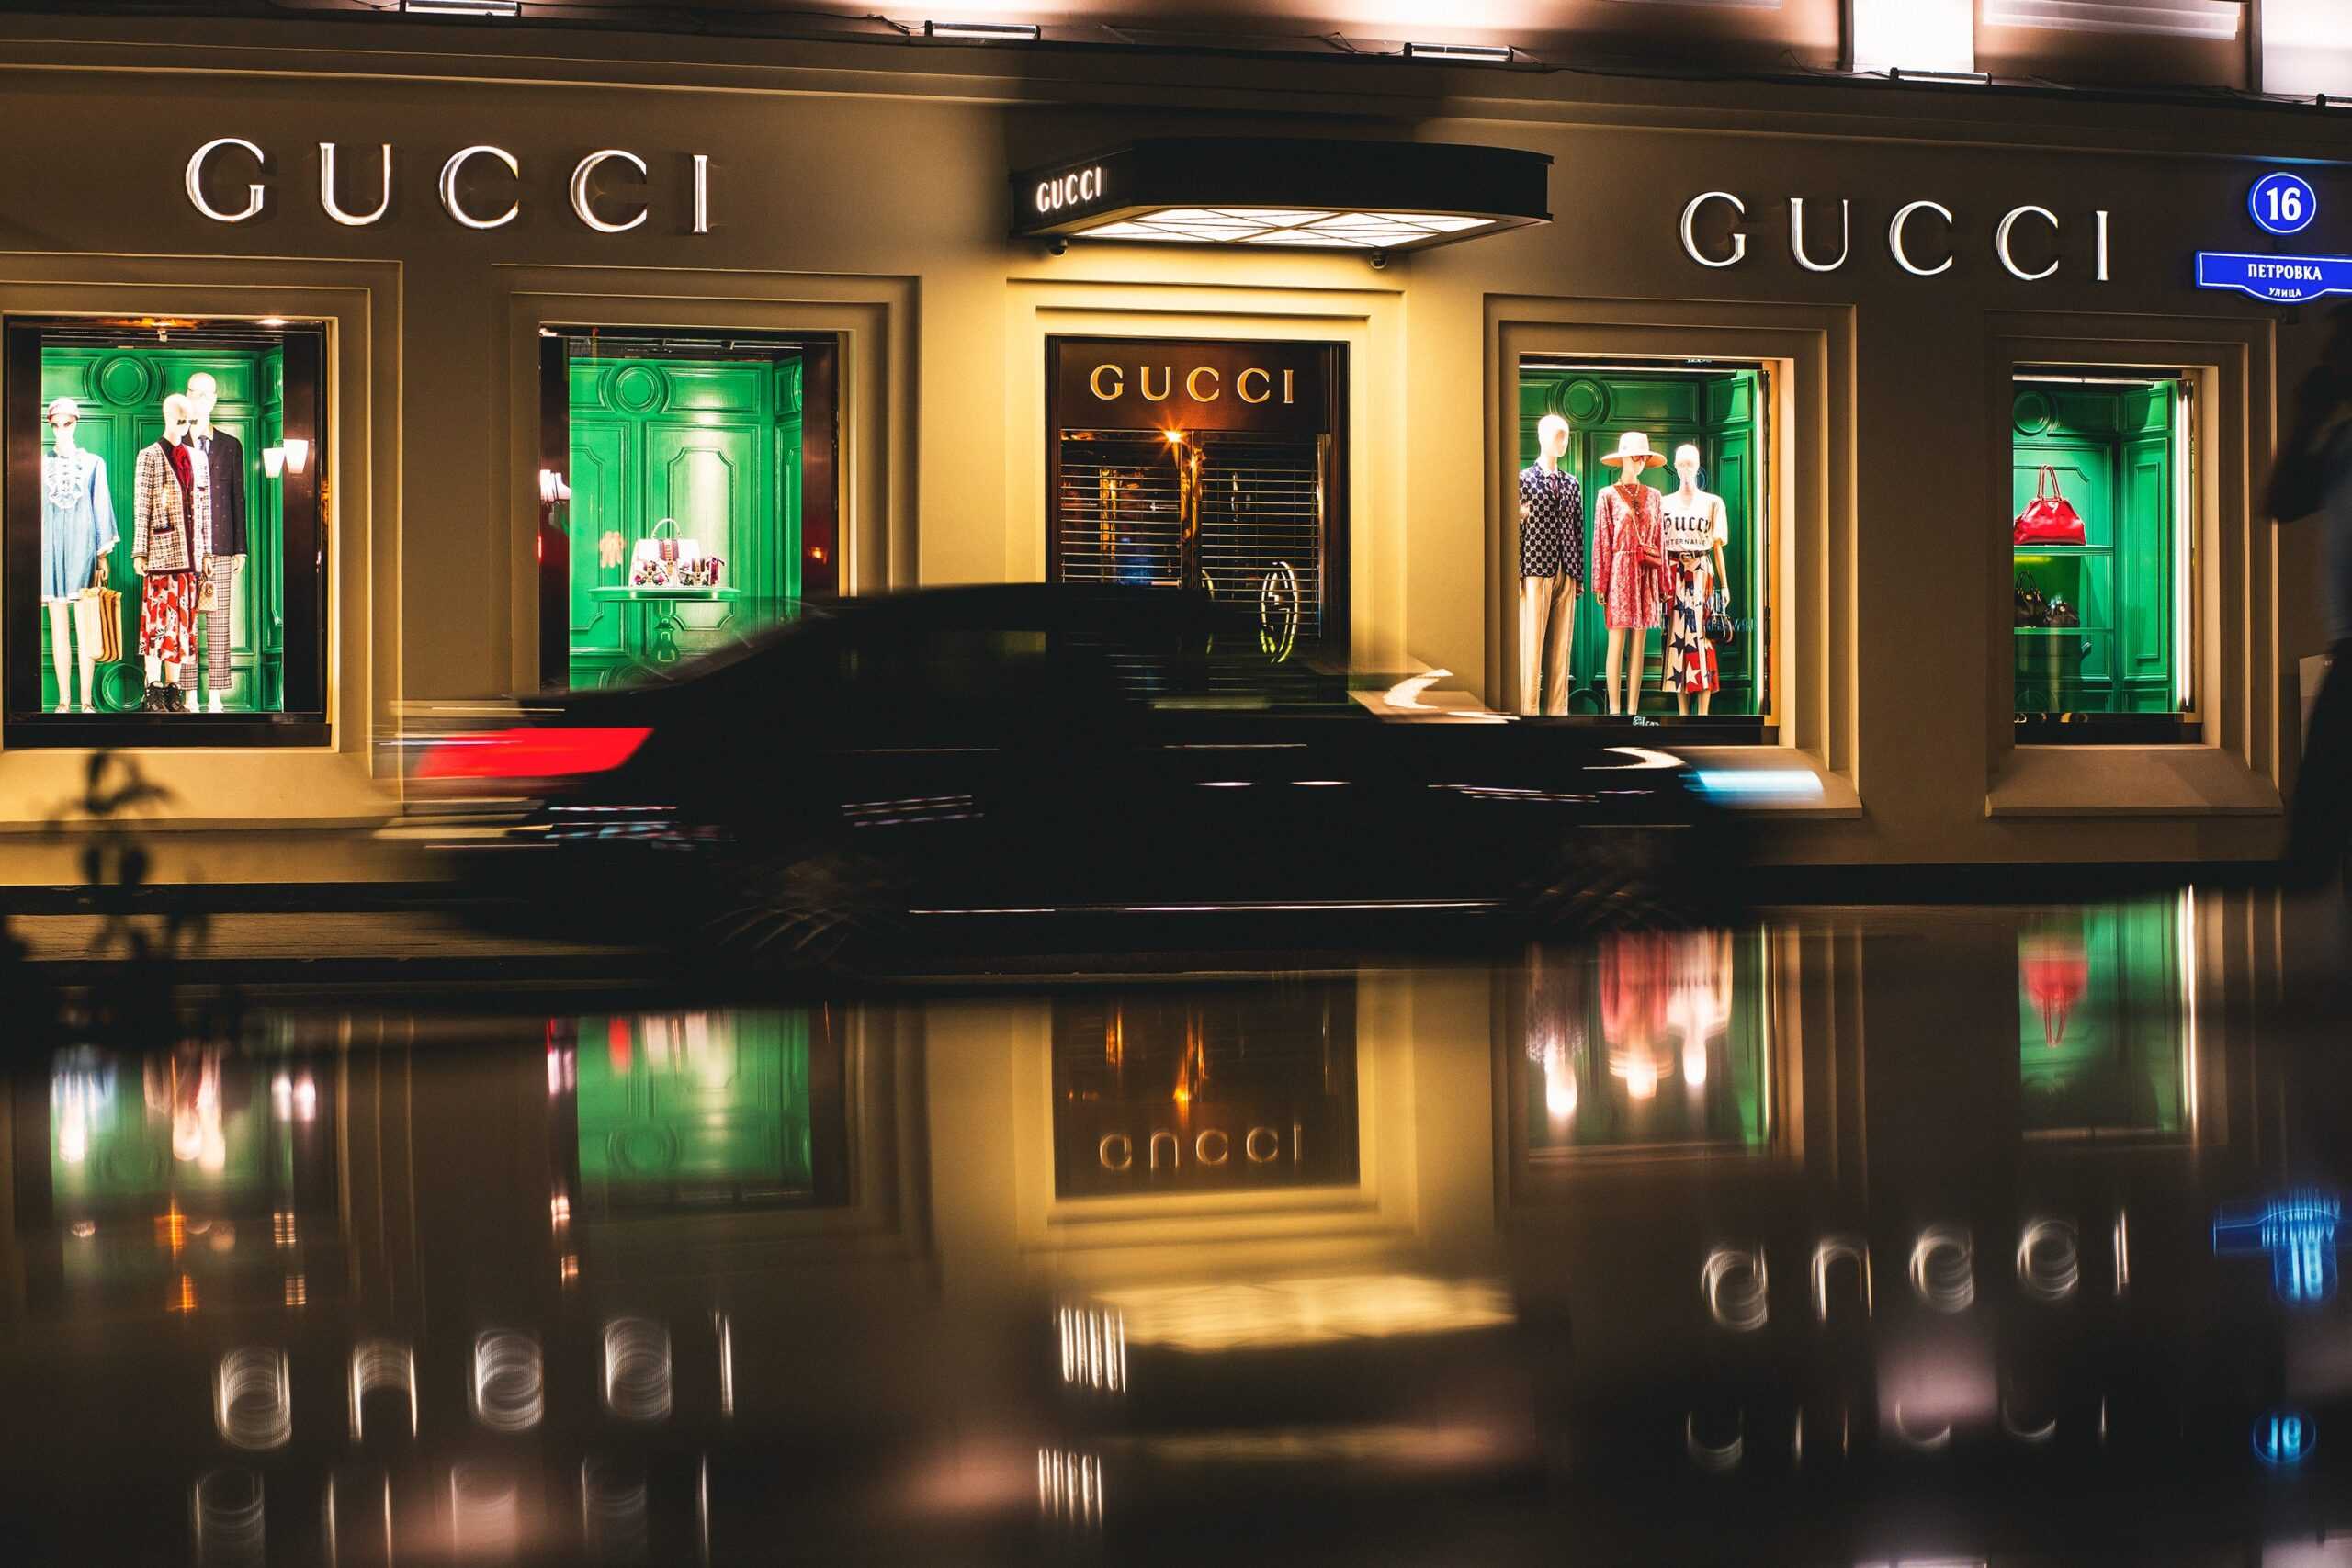 House of Gucci: Why Tom Ford had mixed feelings about his